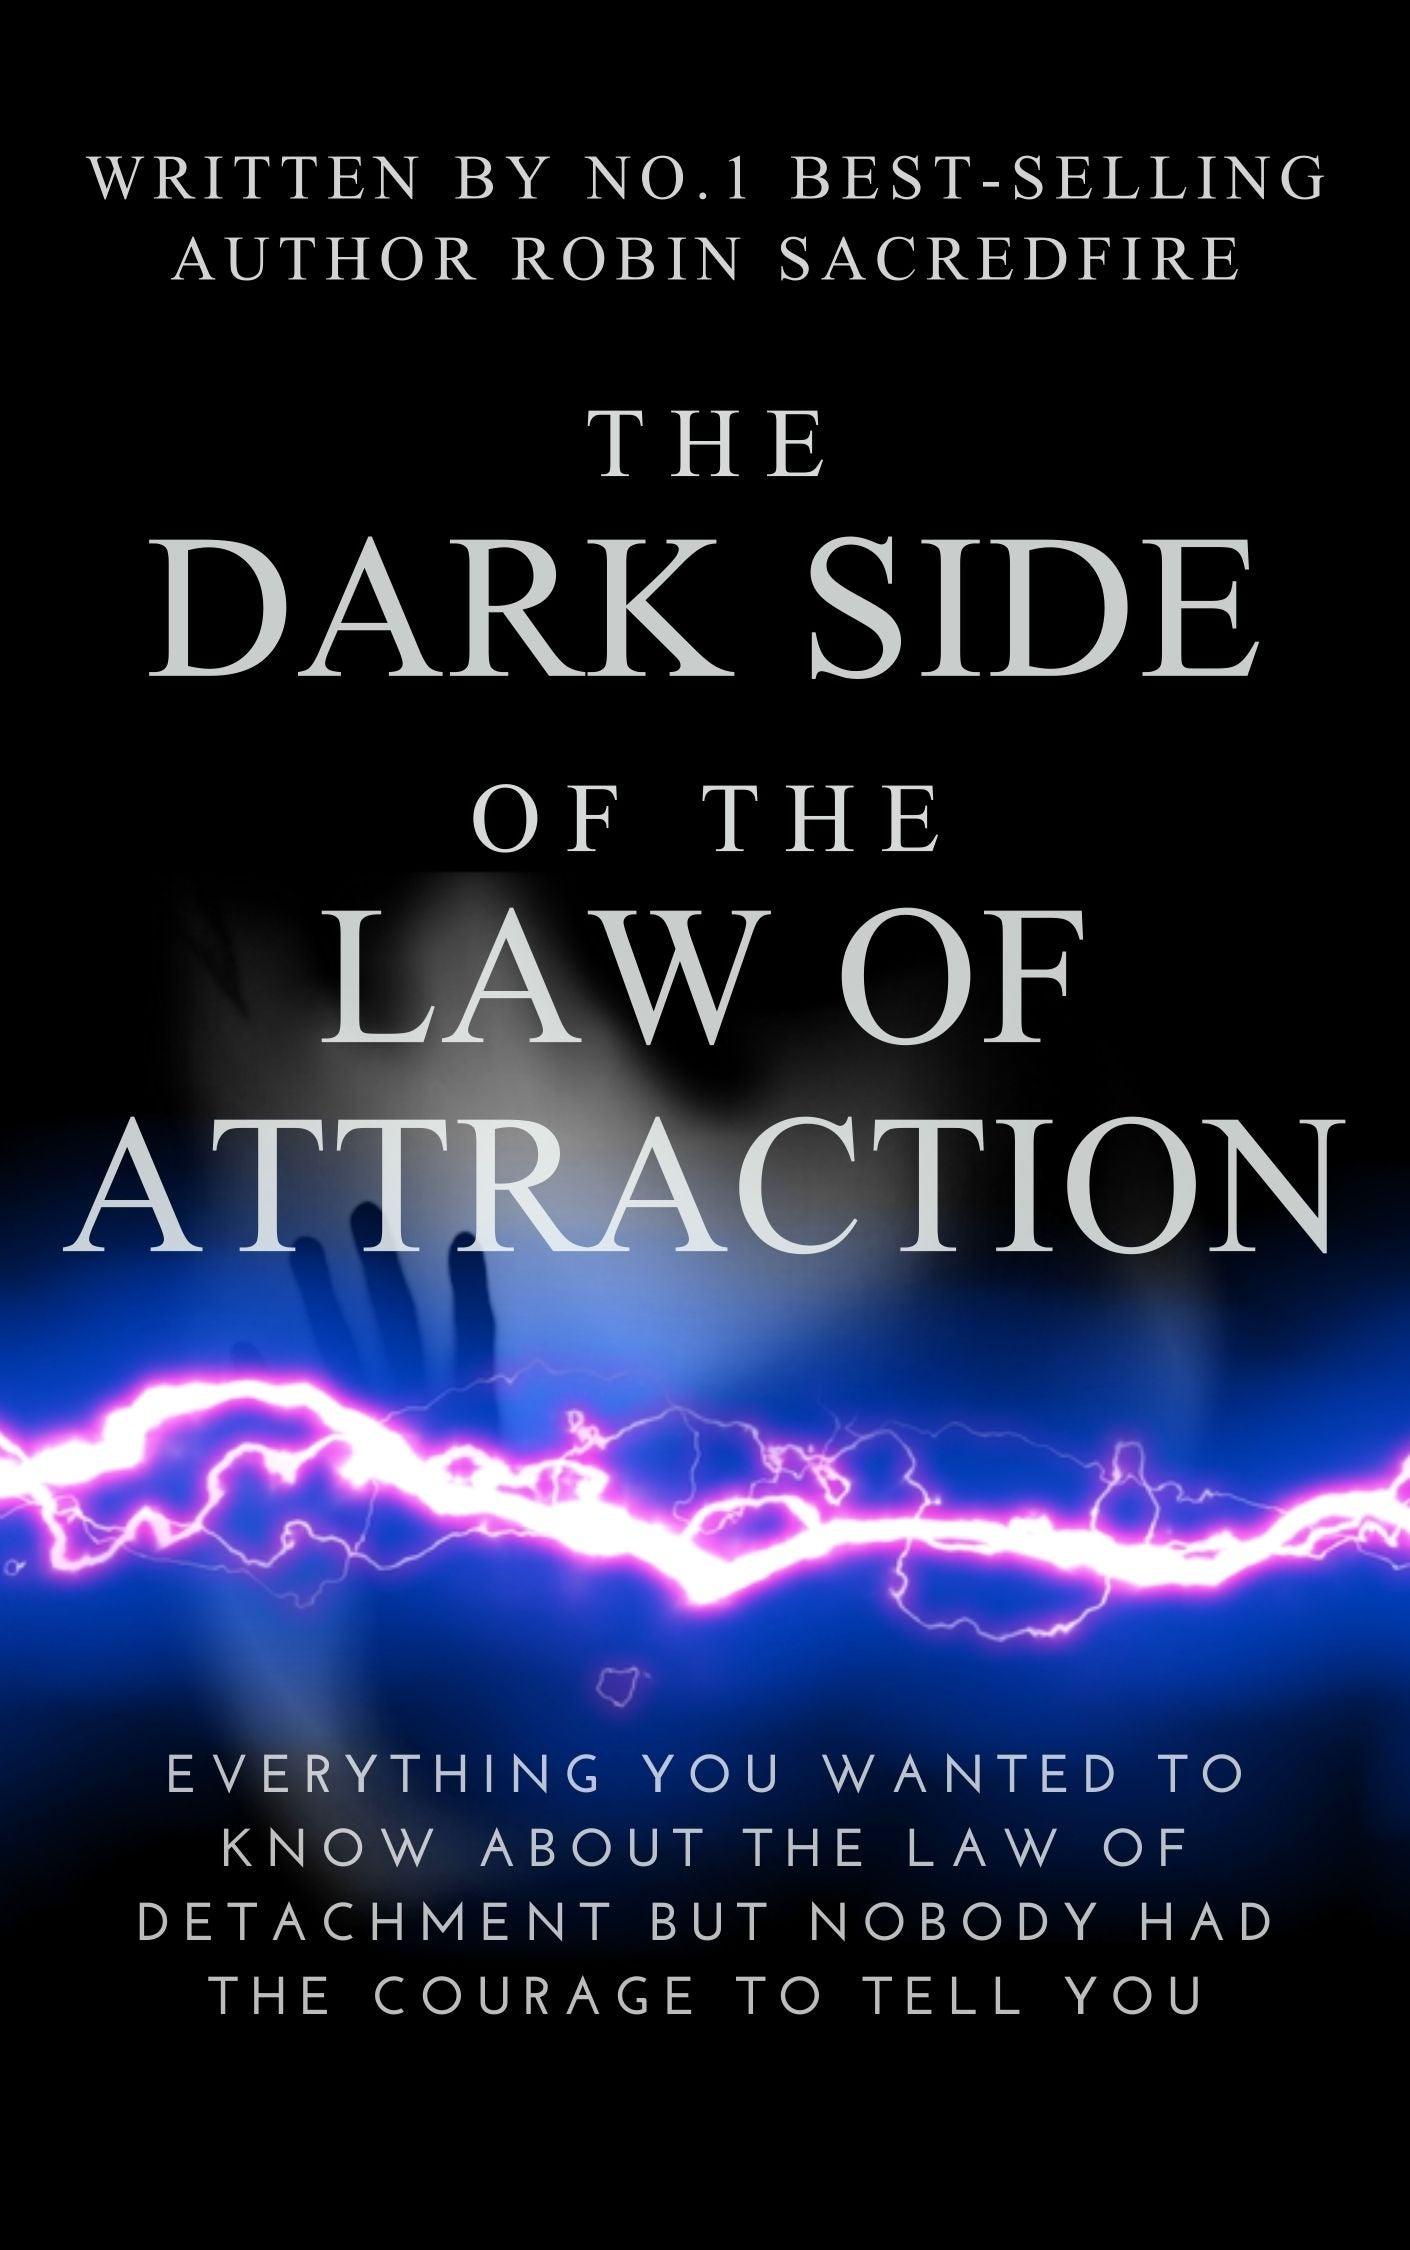 The Dark Side of the Law of Attraction - 22 Lions